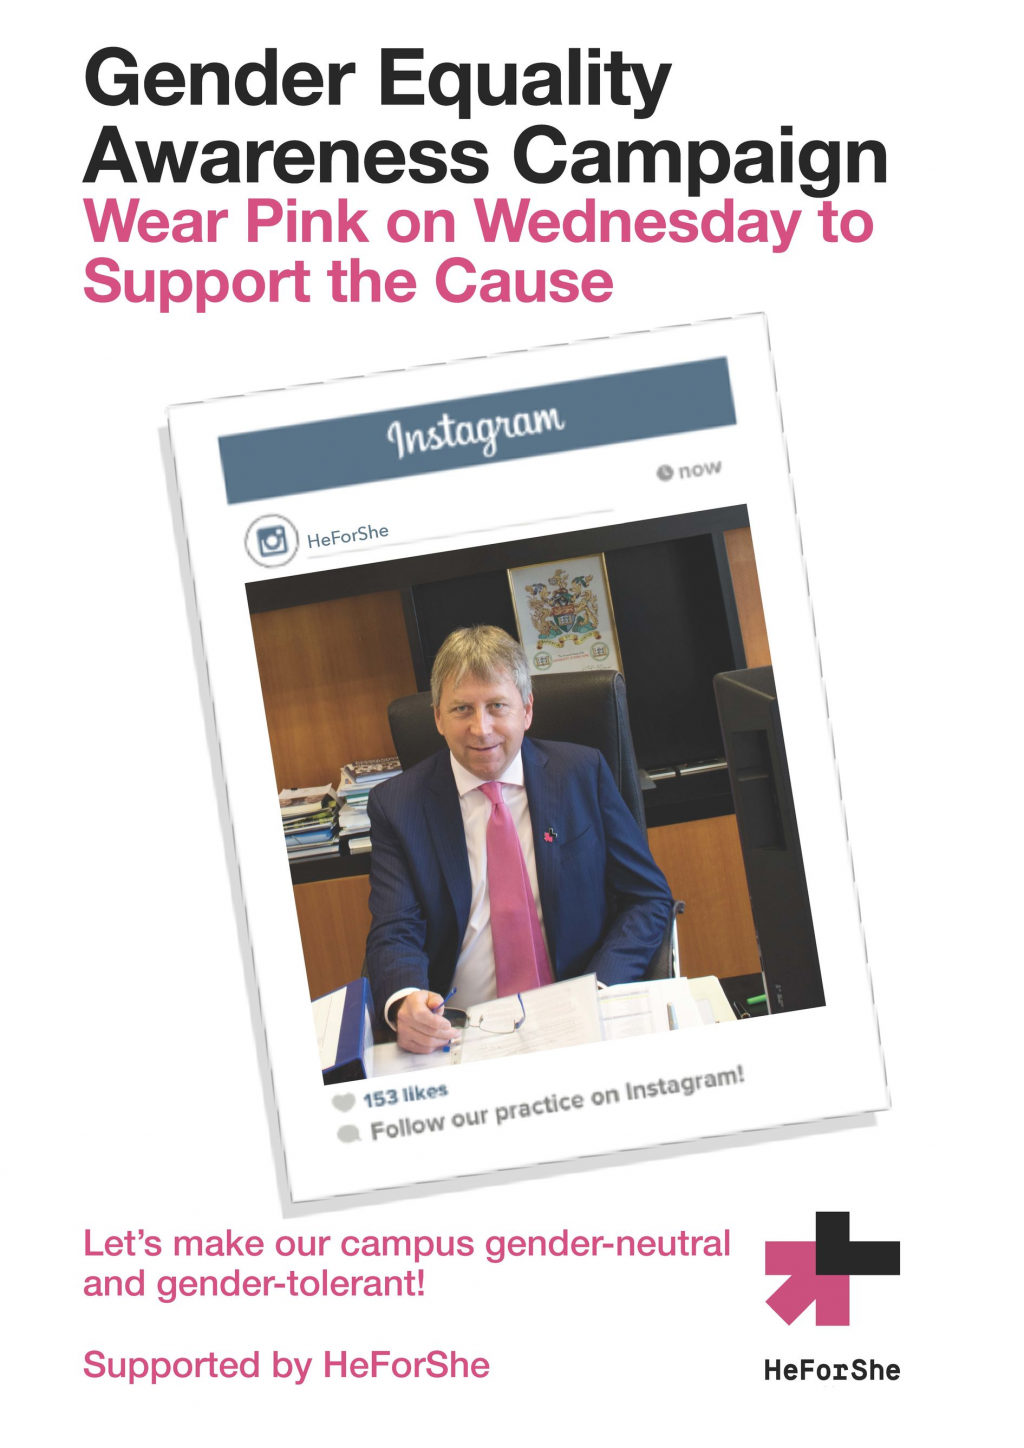 Wear Pink on Wednesday to support Gender Equality Awareness Campaign